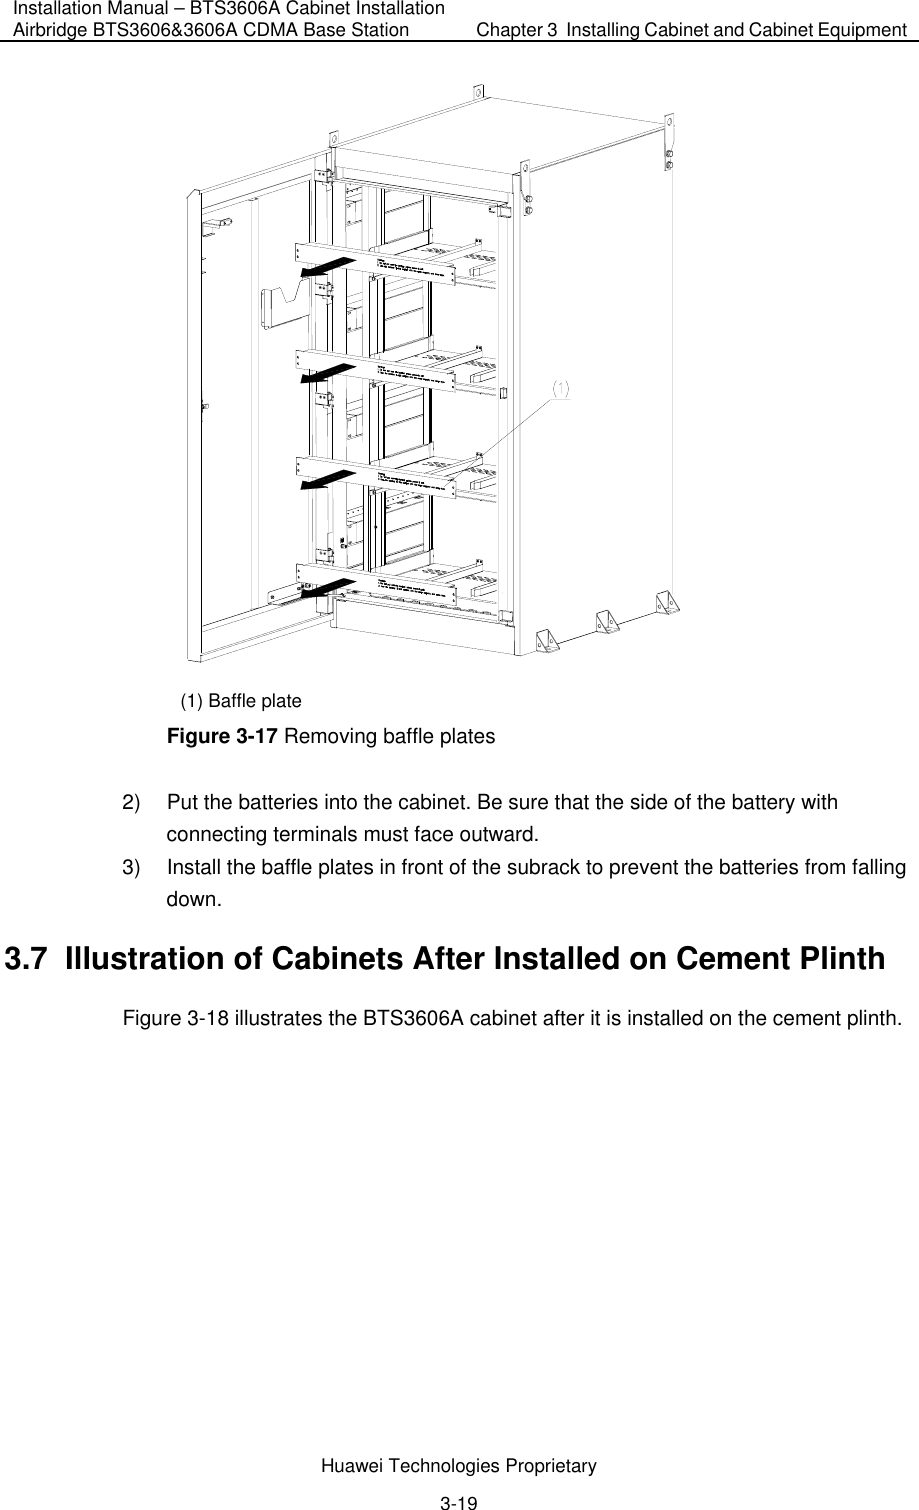 Installation Manual – BTS3606A Cabinet Installation Airbridge BTS3606&amp;3606A CDMA Base Station  Chapter 3  Installing Cabinet and Cabinet Equipment  Huawei Technologies Proprietary 3-19  (1) Baffle plate Figure 3-17 Removing baffle plates 2)  Put the batteries into the cabinet. Be sure that the side of the battery with connecting terminals must face outward.  3)  Install the baffle plates in front of the subrack to prevent the batteries from falling down. 3.7  Illustration of Cabinets After Installed on Cement Plinth Figure 3-18 illustrates the BTS3606A cabinet after it is installed on the cement plinth. 